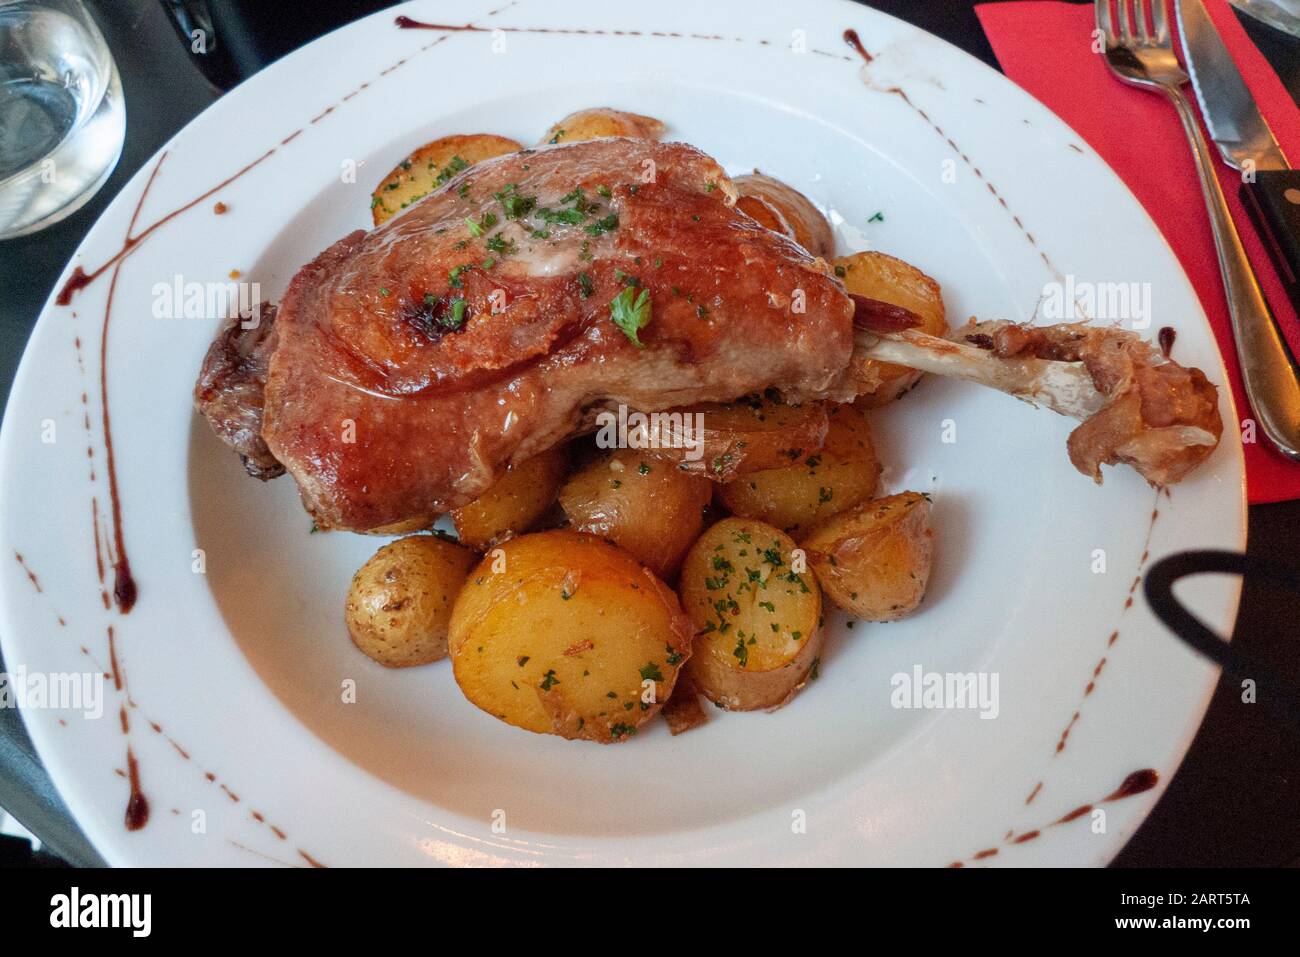 Duck Confit served on a bed of new potatoes is a French culinary specialty in Paris, France. Stock Photo